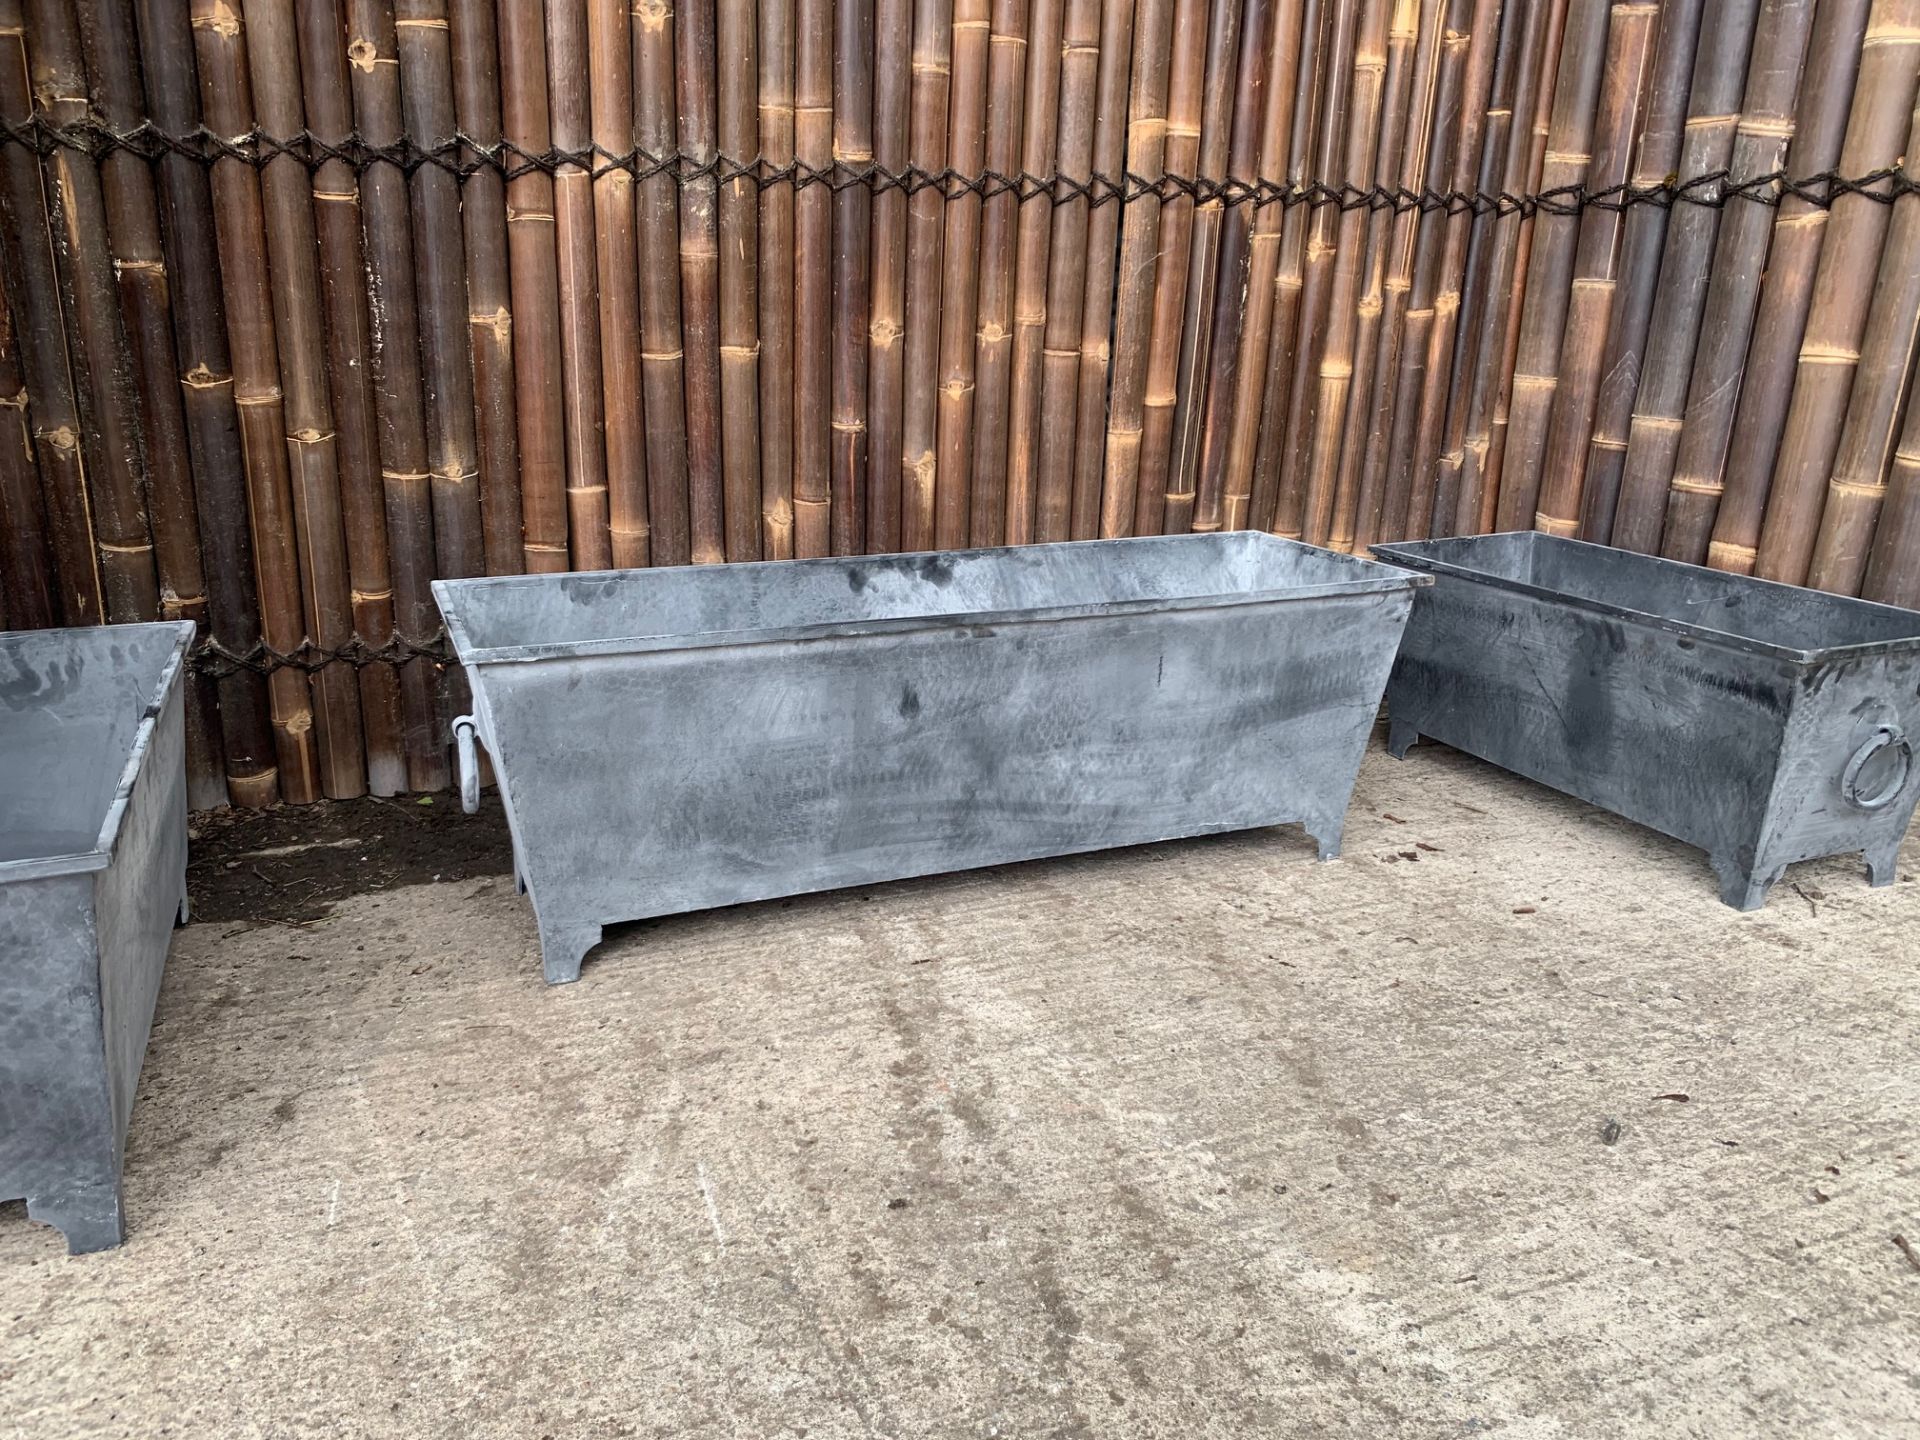 1 x Quality New Large Rectangular Steel Ornate Planter On Feet With Handles (120.5Cm X 40.5Cm X - Image 3 of 4